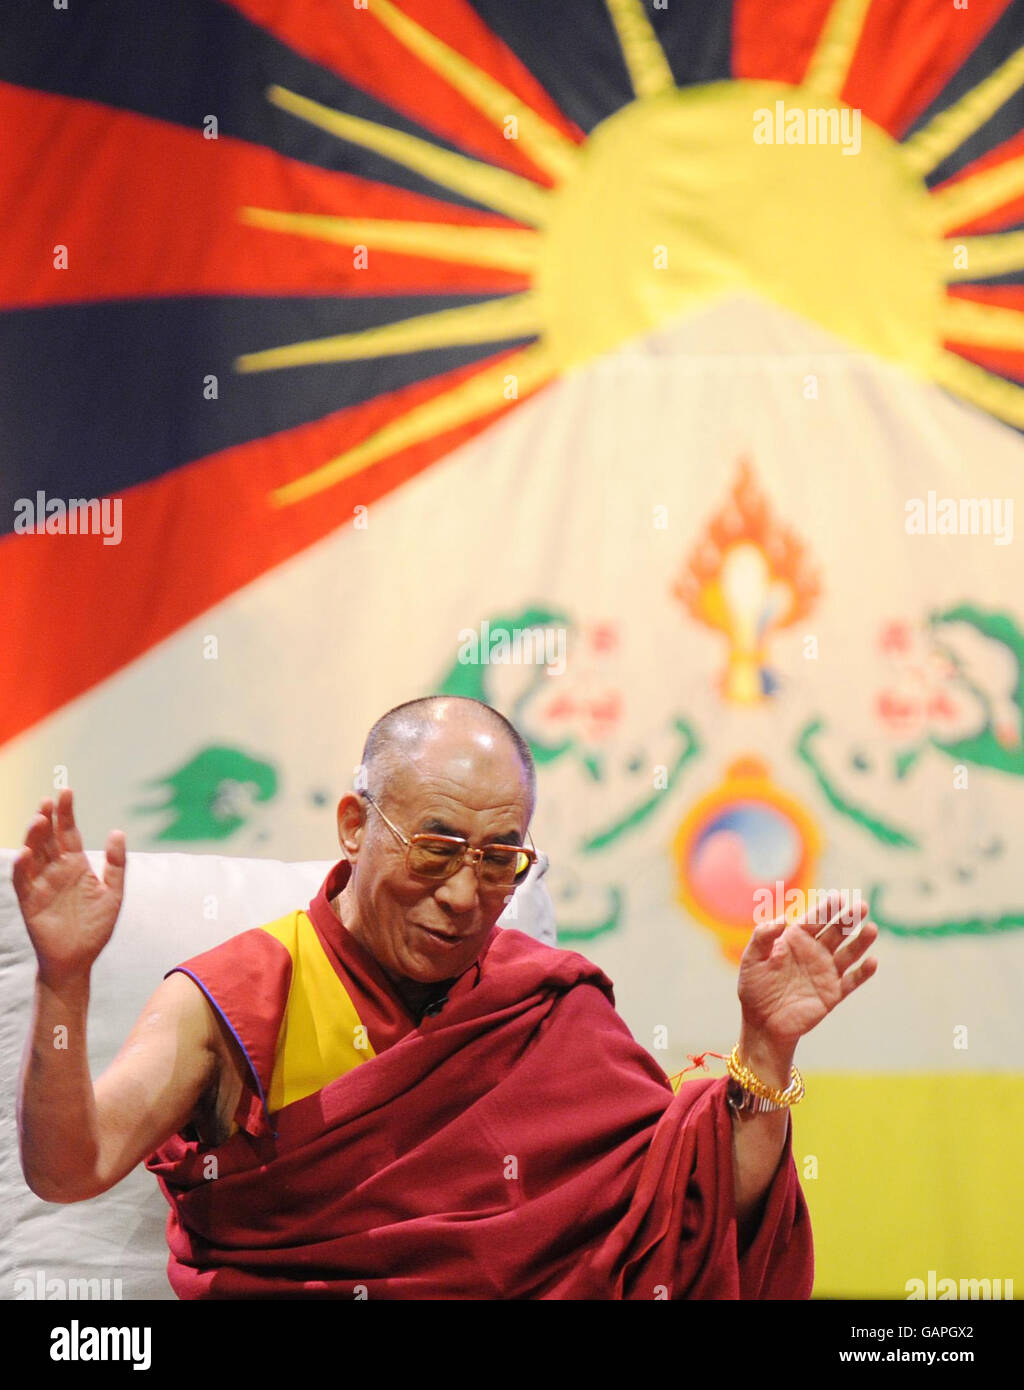 The Dalai Lama at the Royal Albert Hall in London where he spoke to an audience. Stock Photo